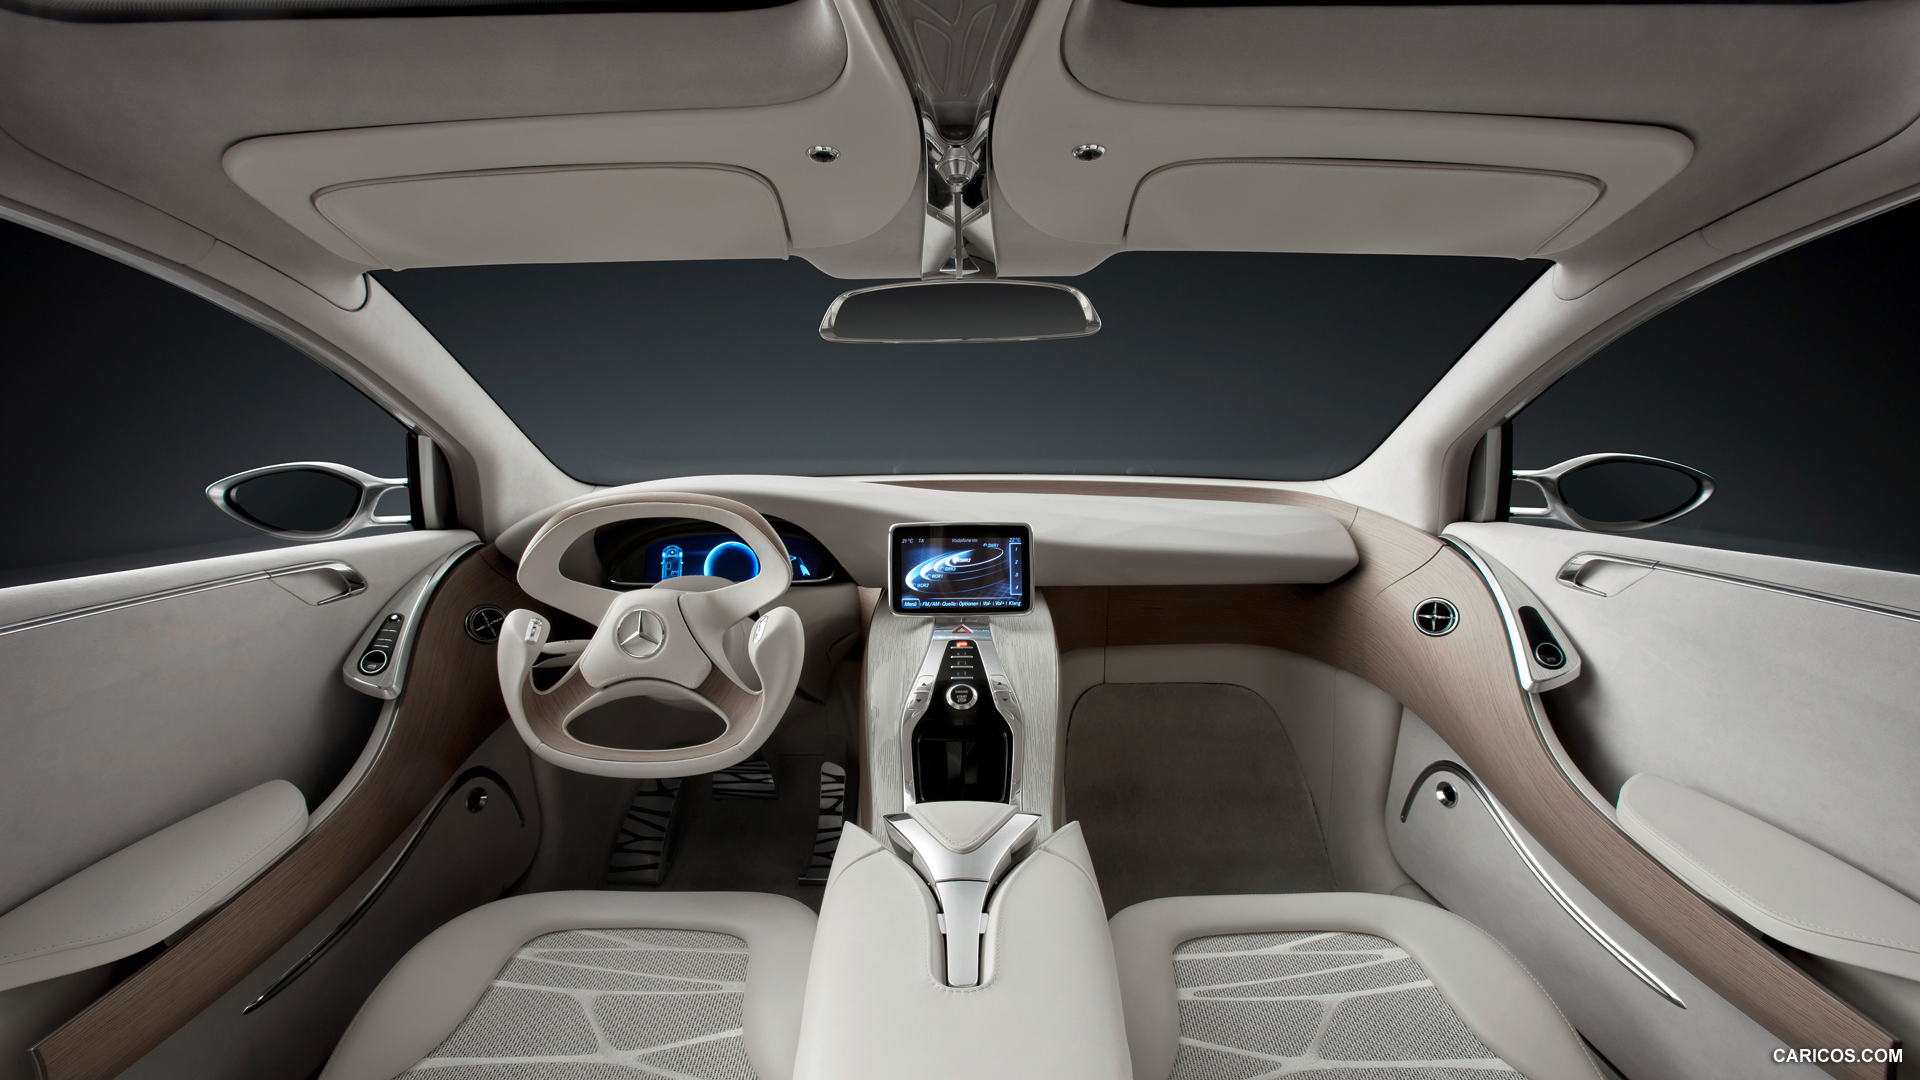 Mercedes-Benz F800 Style Concept (2010)  - Interior, Dashboard, #59 of 120